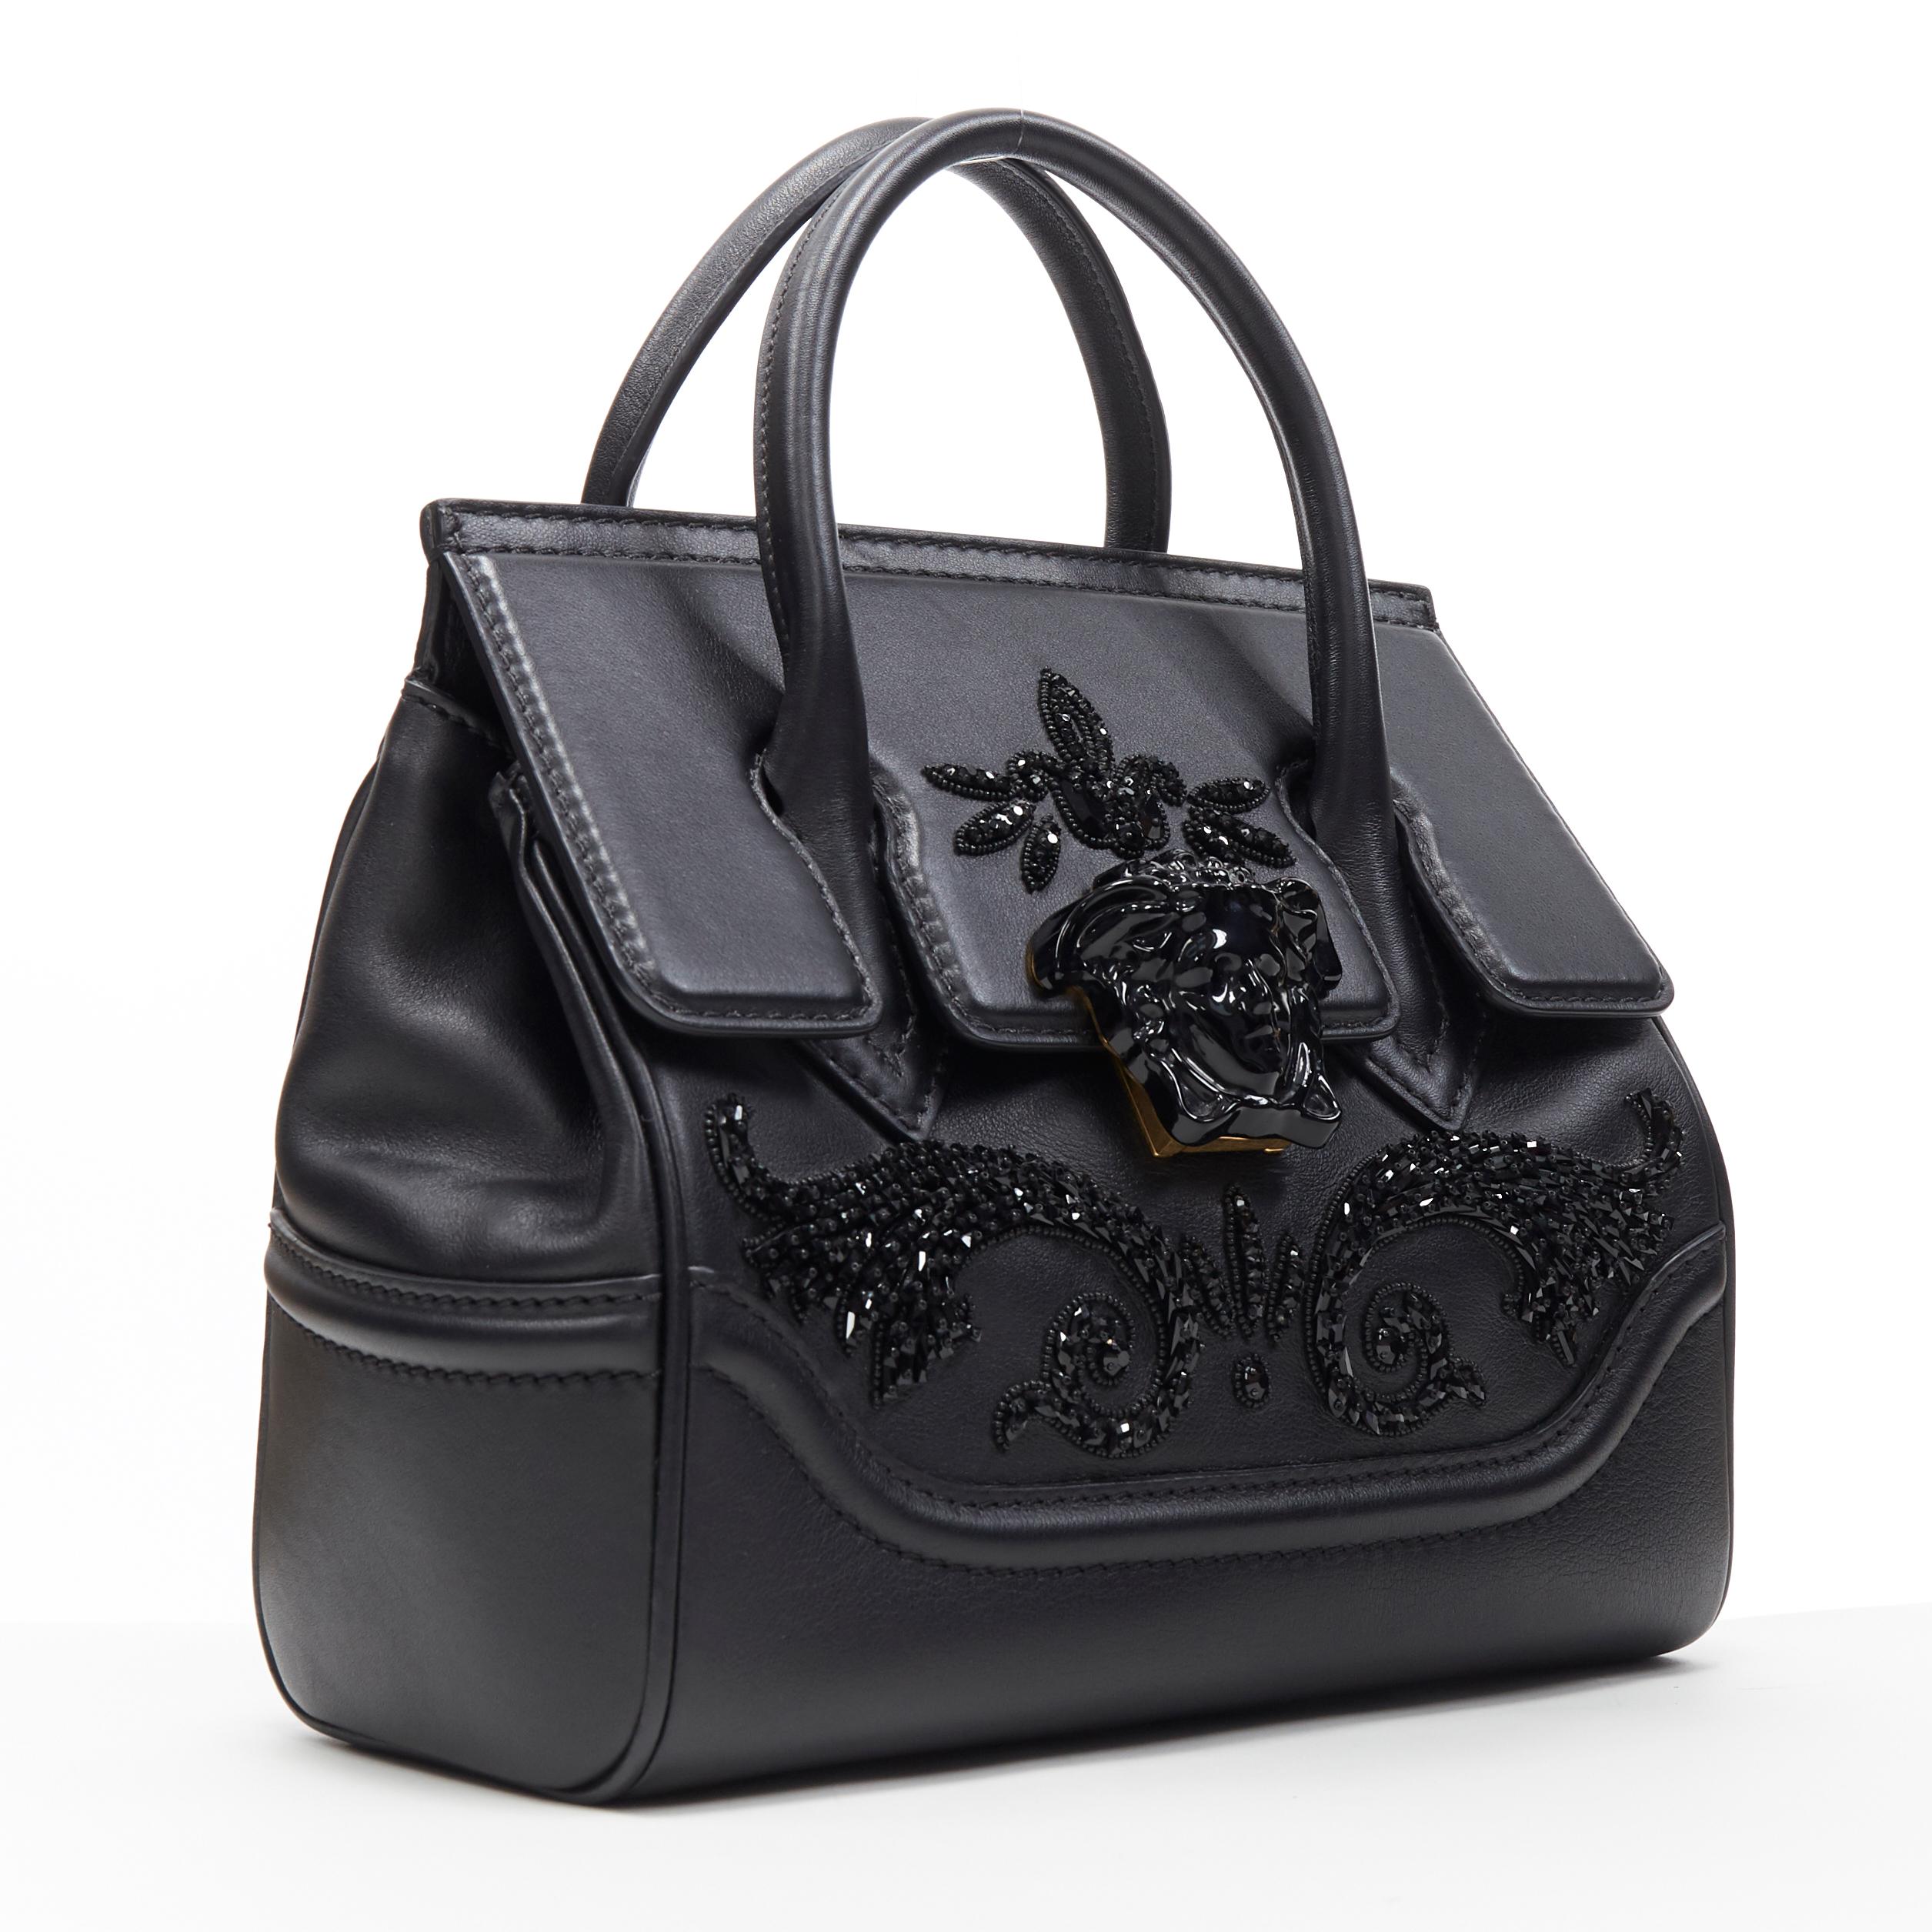 new VERSACE Palazzo Empire Small crystal baroque embellished Medusa satchel bag 
Brand: Versace
Designer: Donatella Versace
Collection: 2019
Model Name / Style: Palazzo Empire
Material: Leather
Color: Black
Pattern: Solid
Closure: Clasp
Lining